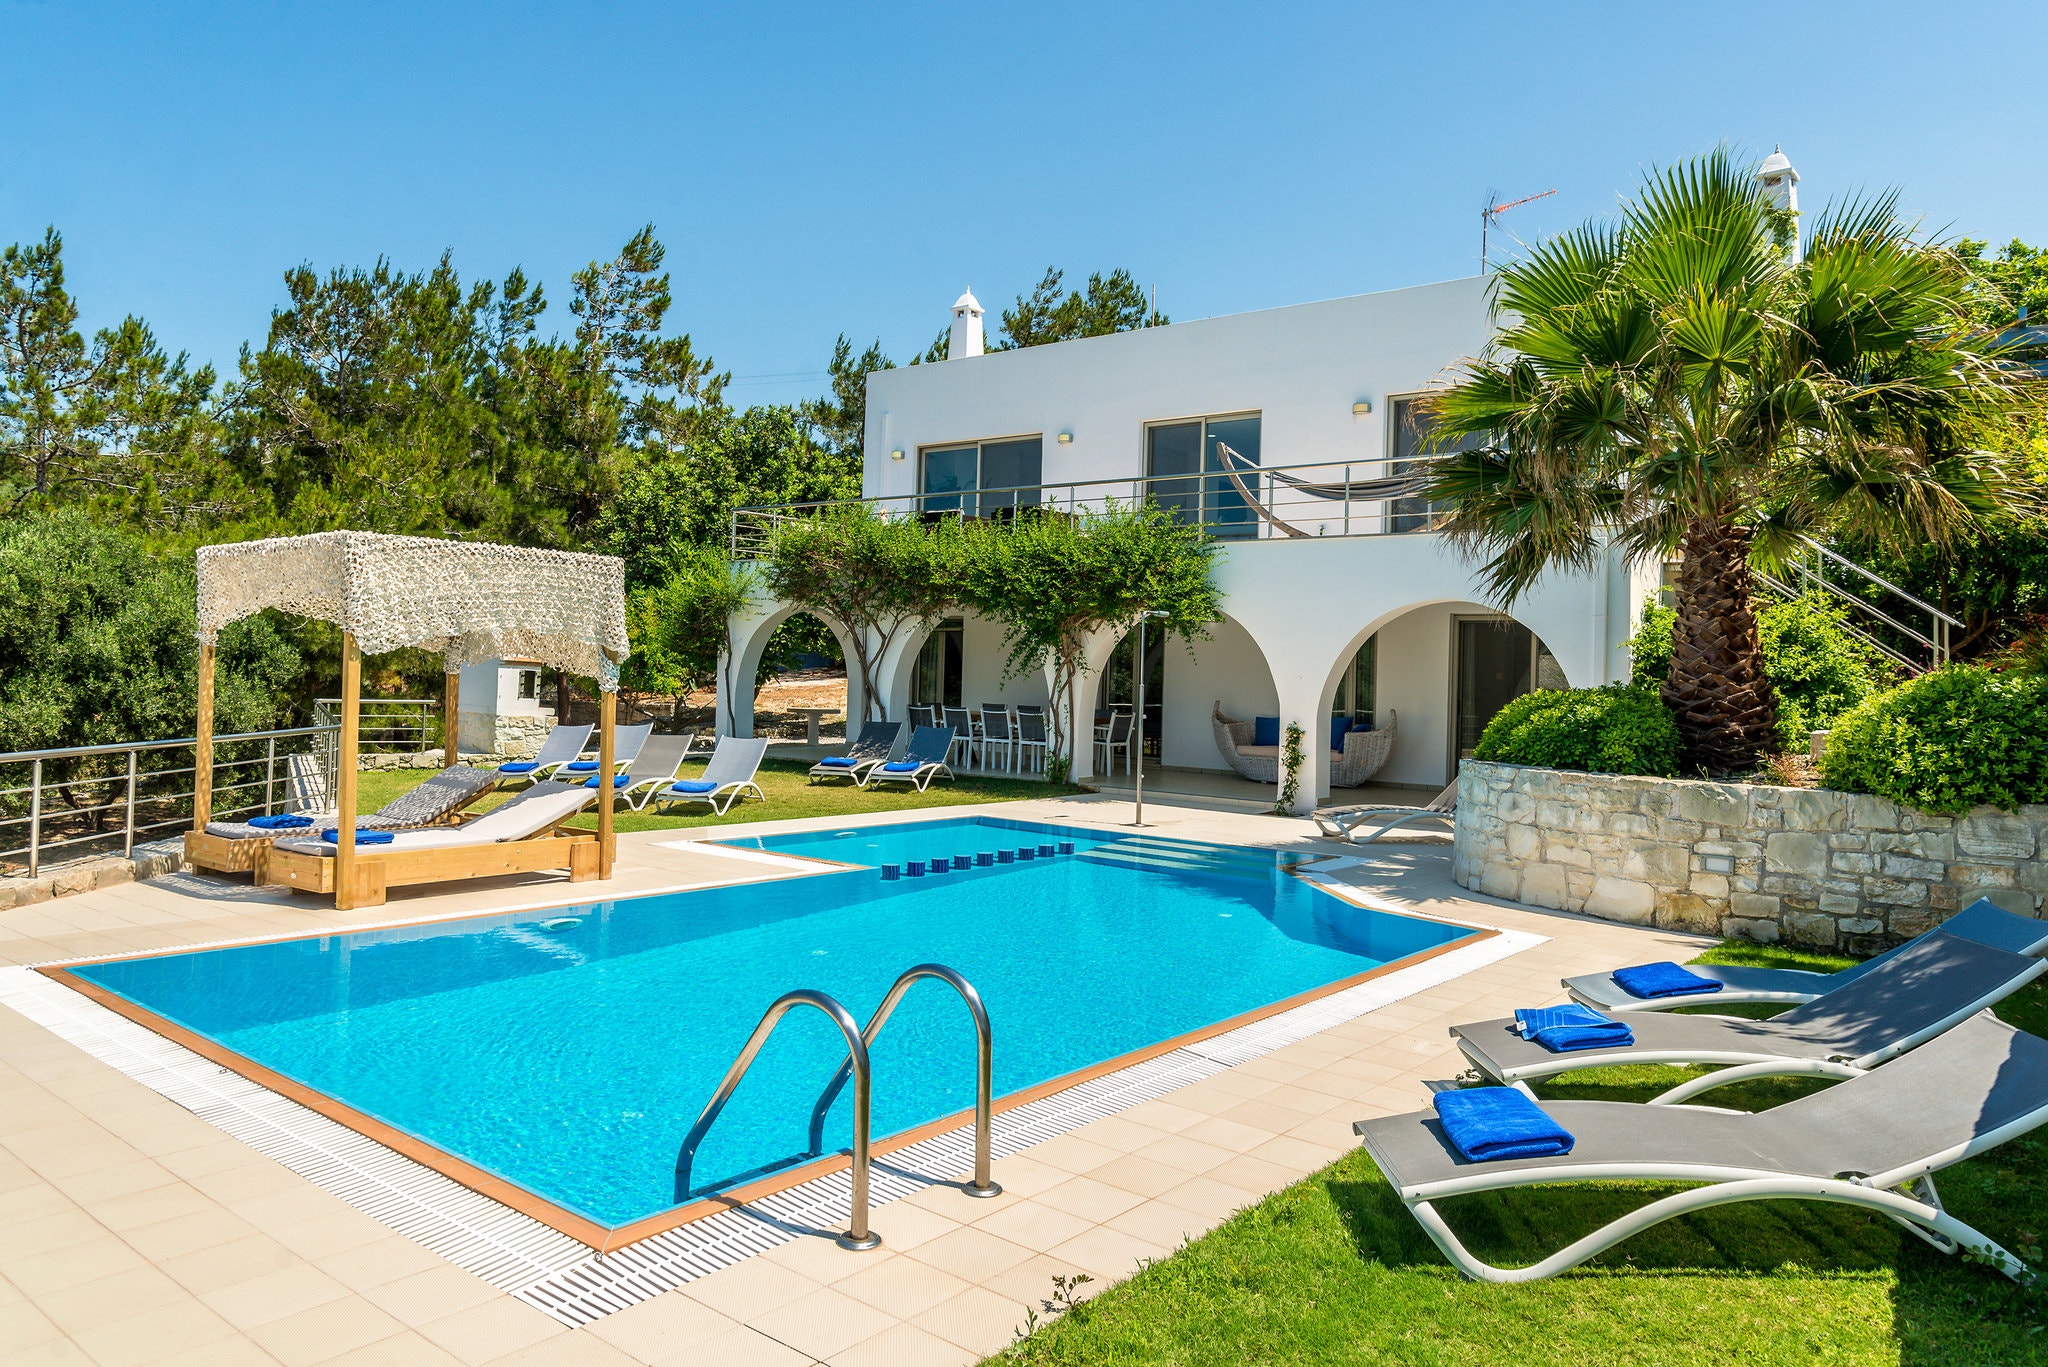 House Hunting in … Greece